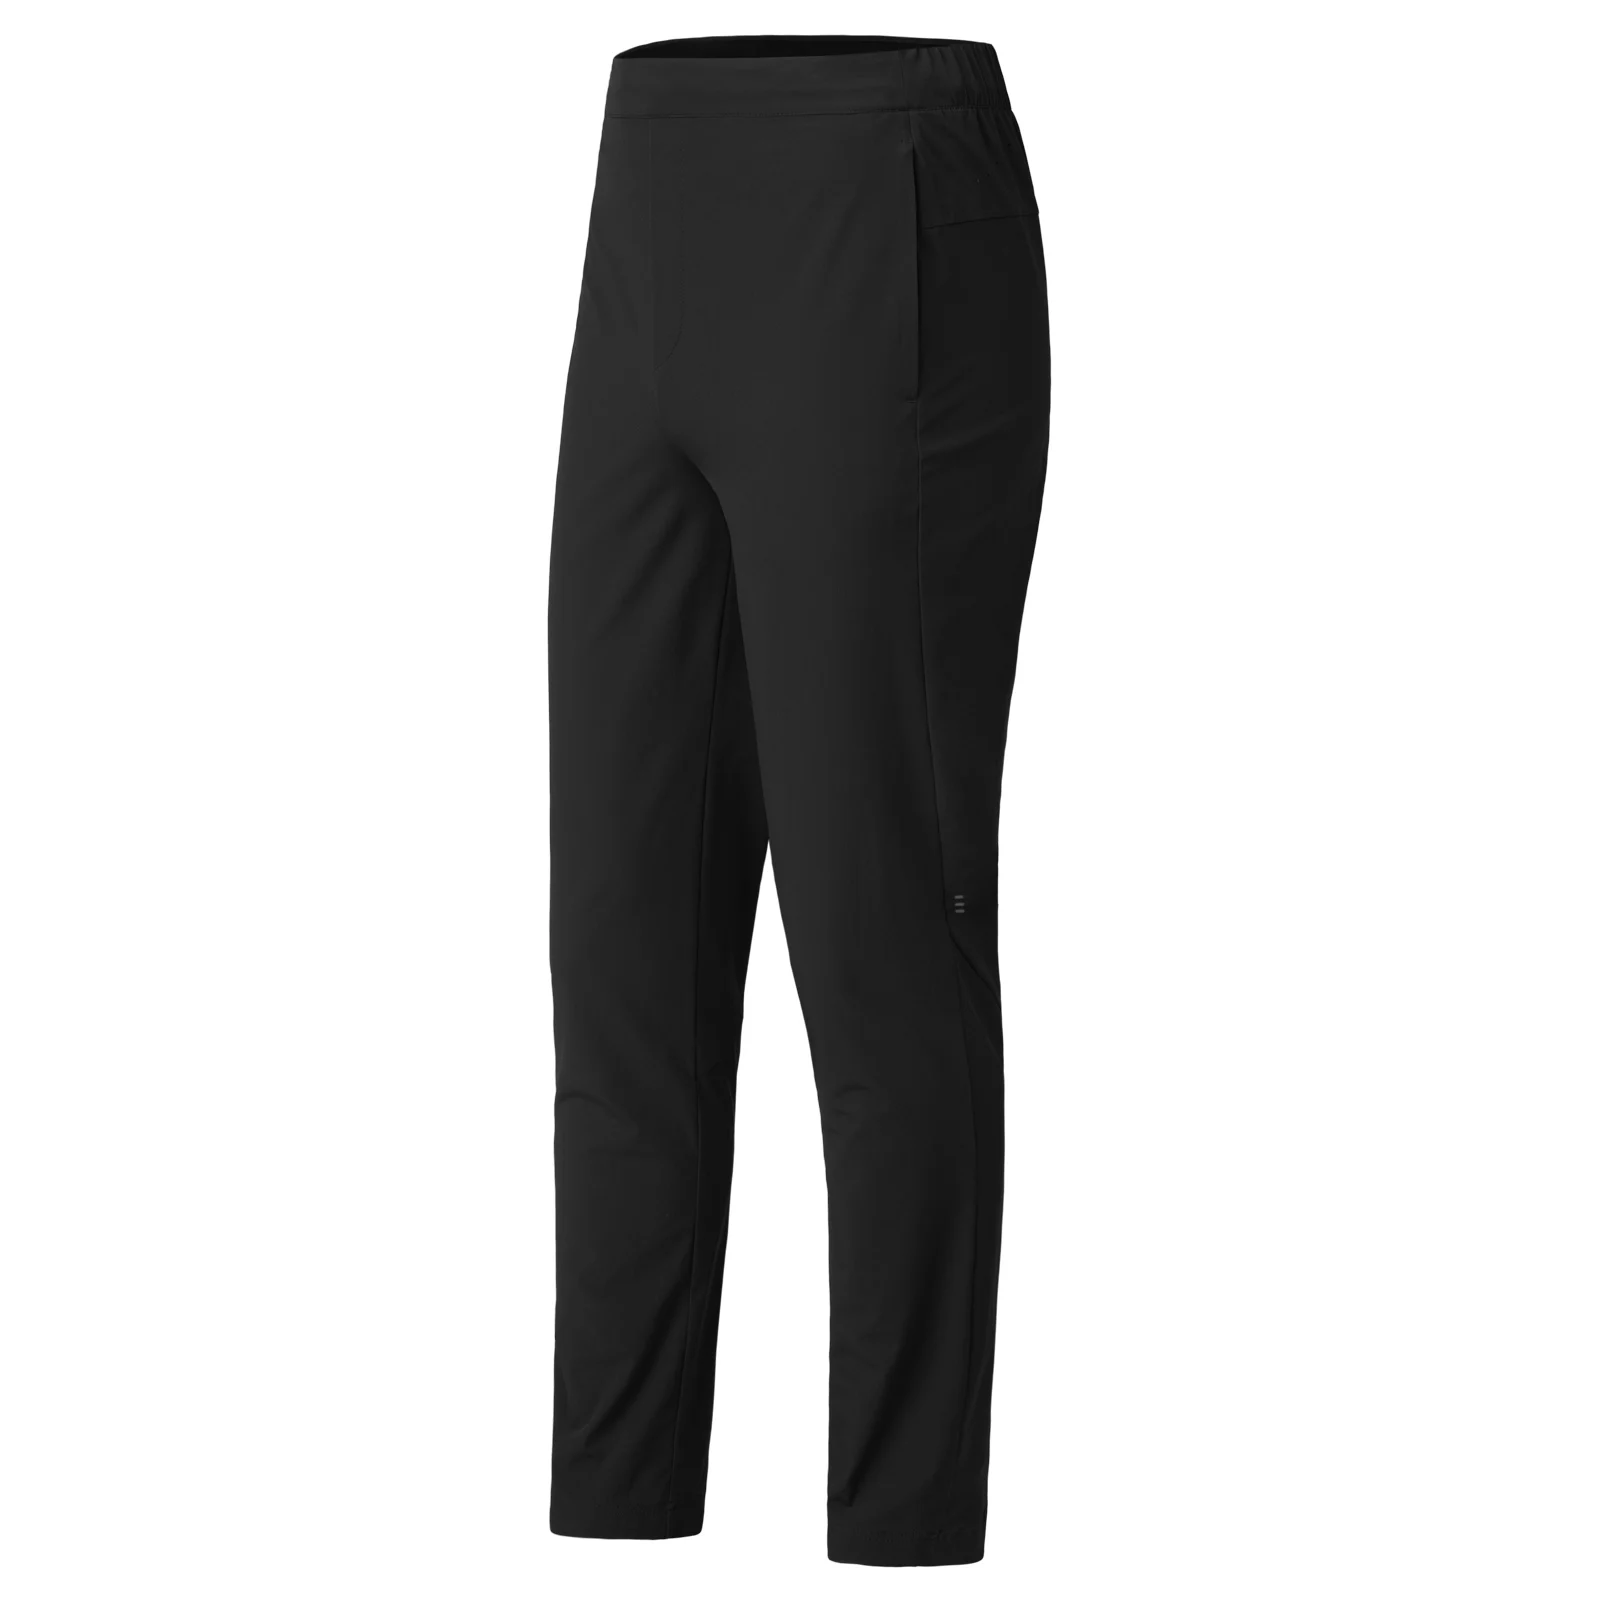 aonijie-men's-pants-sports-quick-drying-summer-thin-running-training-pants-waterproof-straight-for-hiking-camping